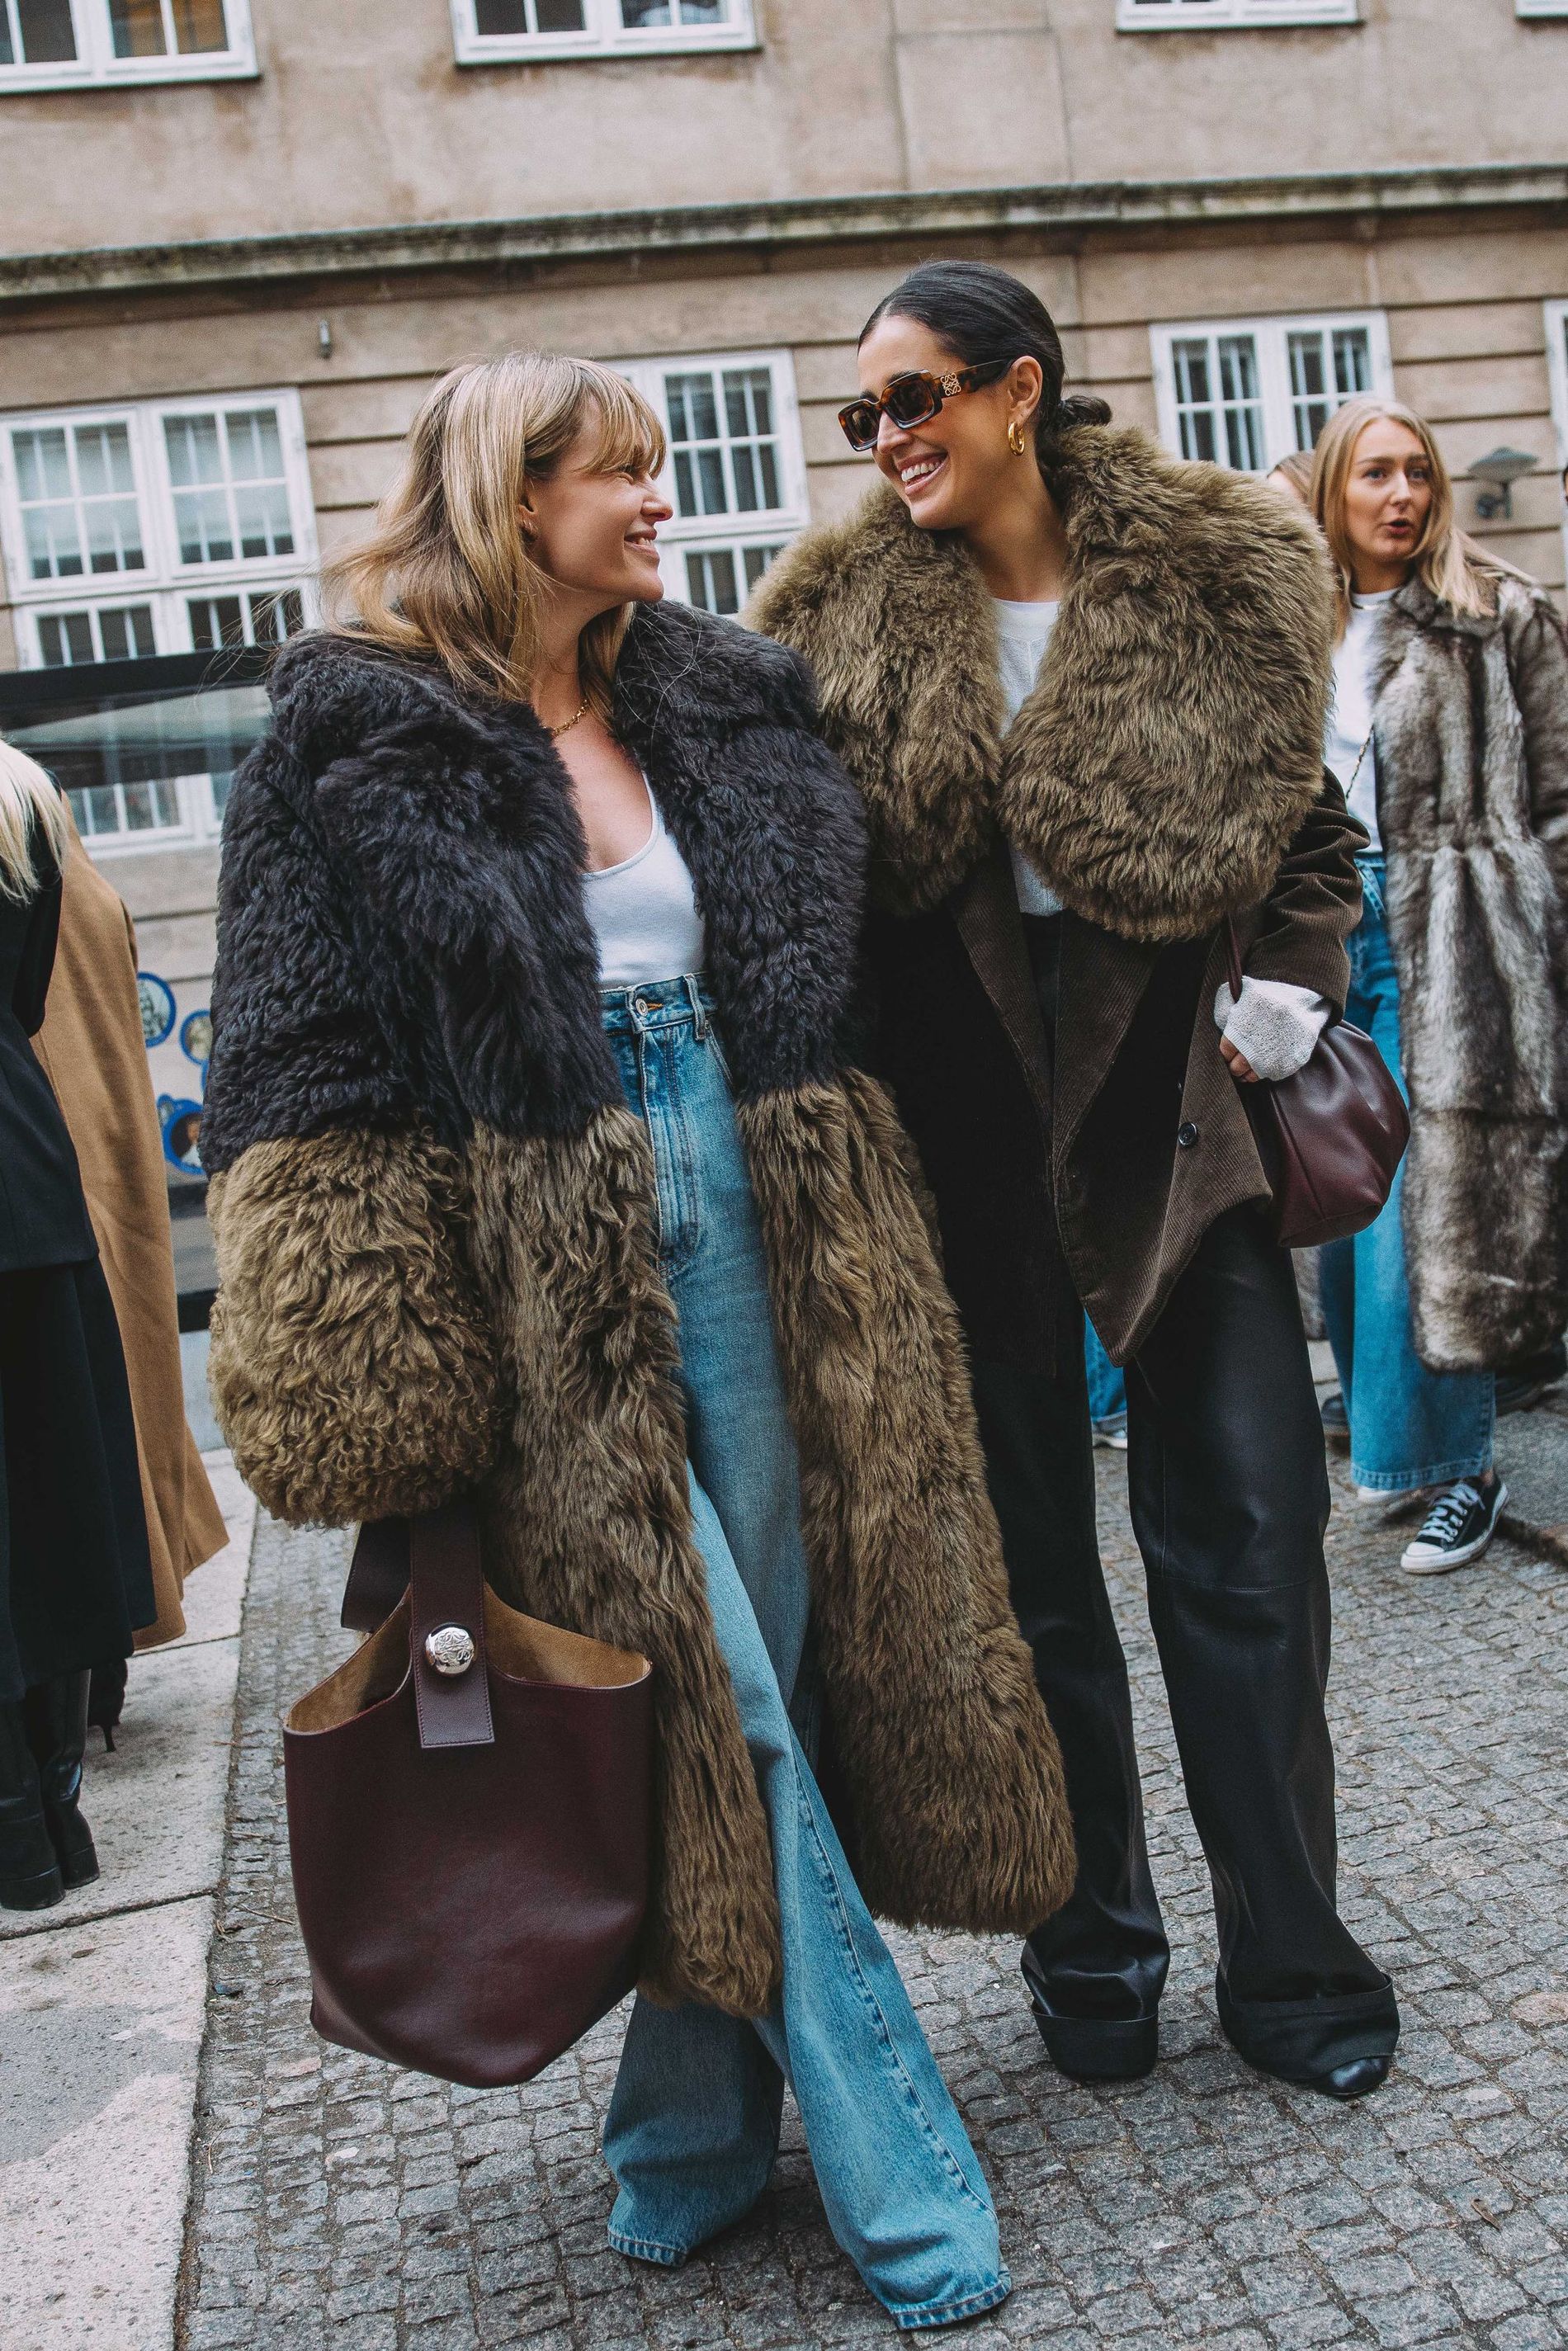 Jeanette Madsen and Darja Barannik wear faux fur coats paired with laid-back denim and brown leather handbags